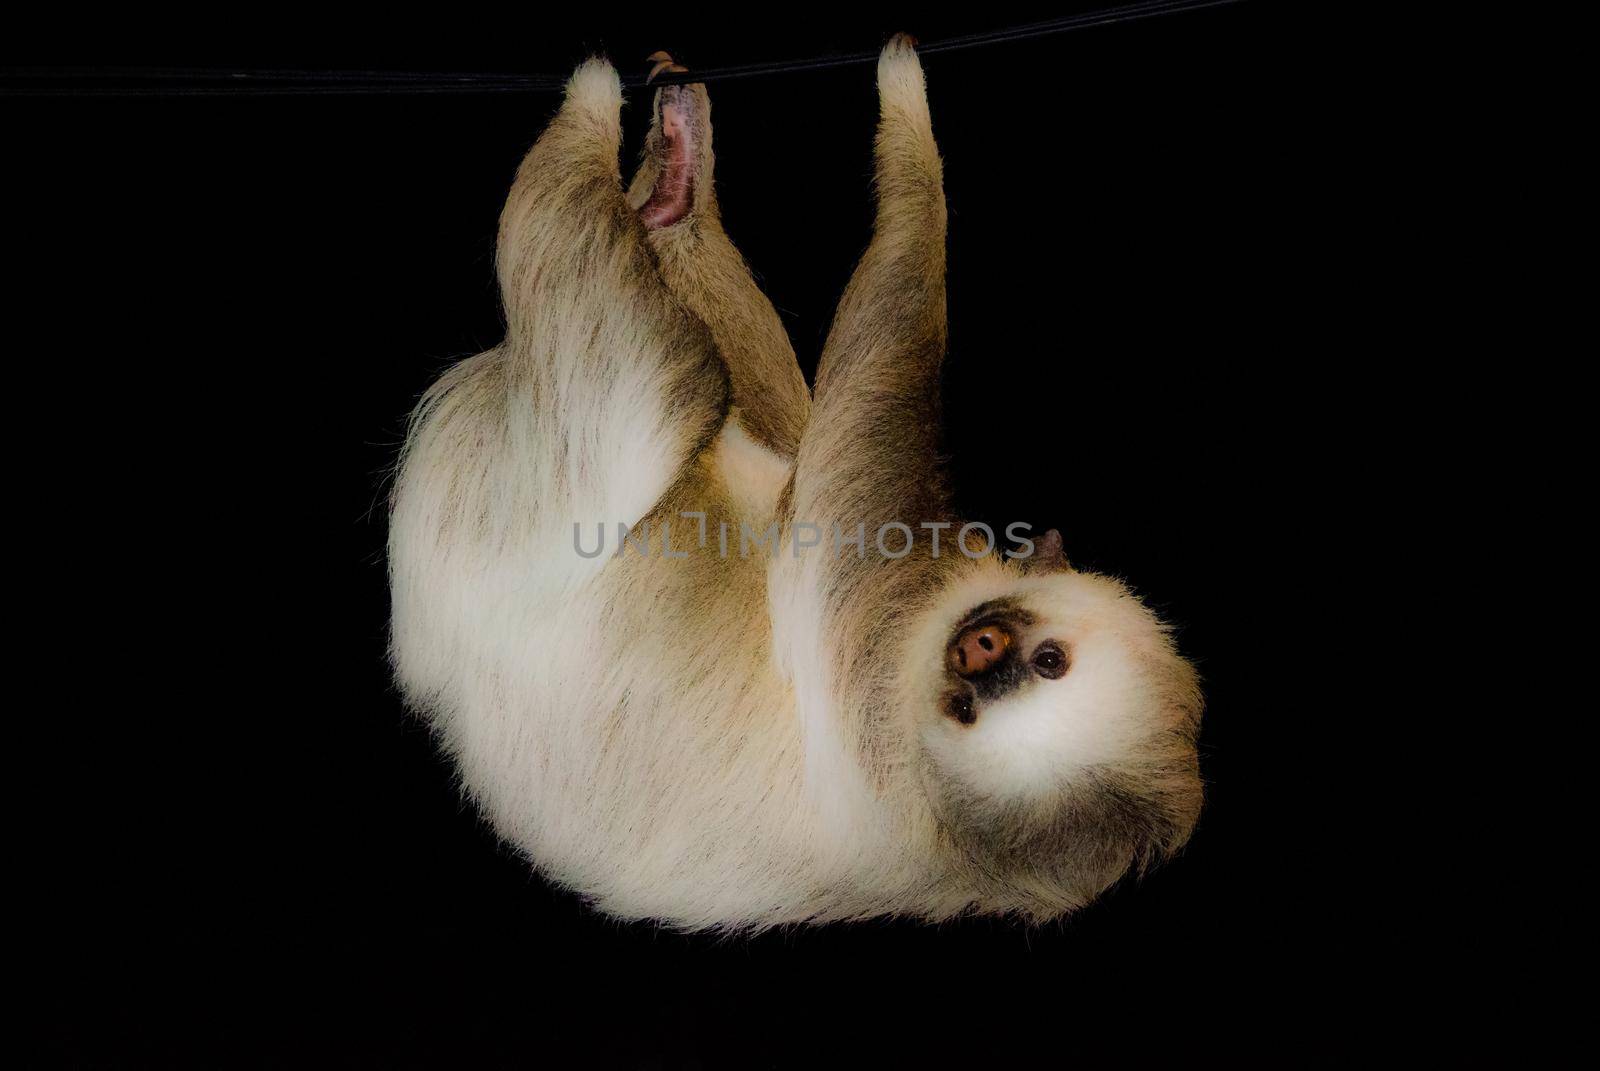 Three toed sloth hanging from a power line Costa Rica